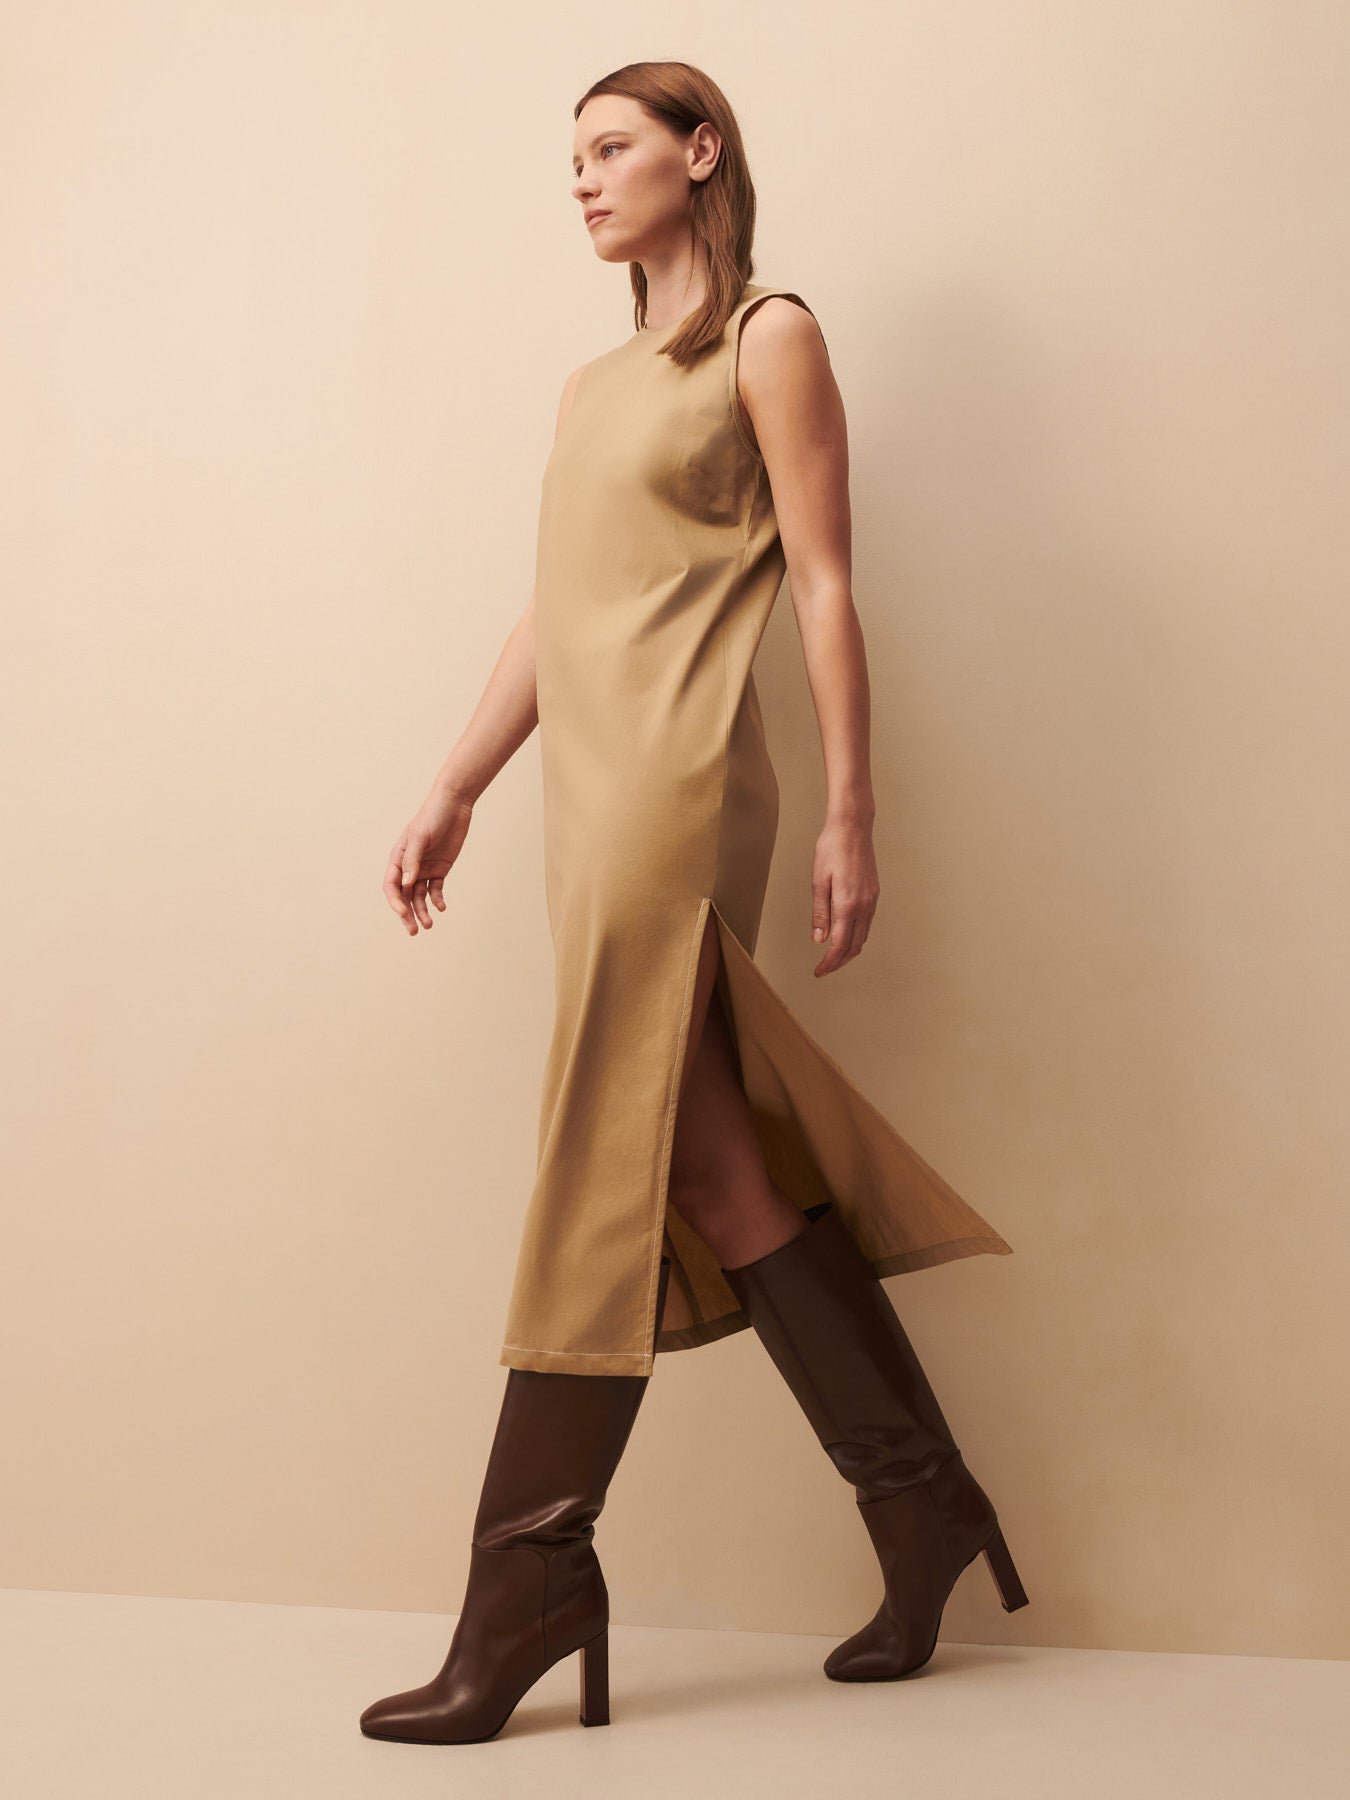 TWP Camel Delaney dress in camel view 1